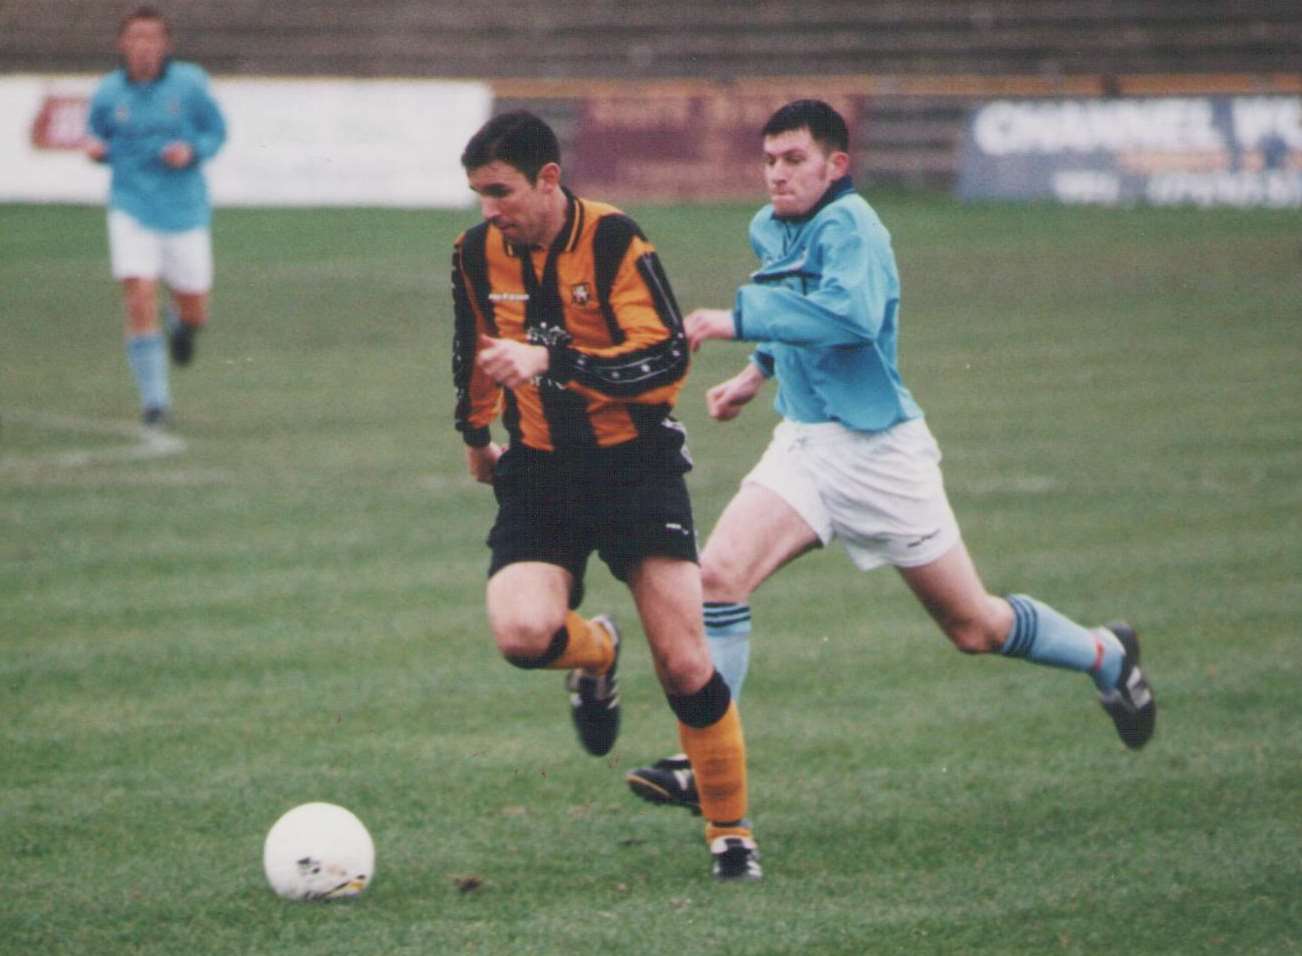 Winger Jeff Ross was Neil Cugley's first signing as Folkestone Invicta manager